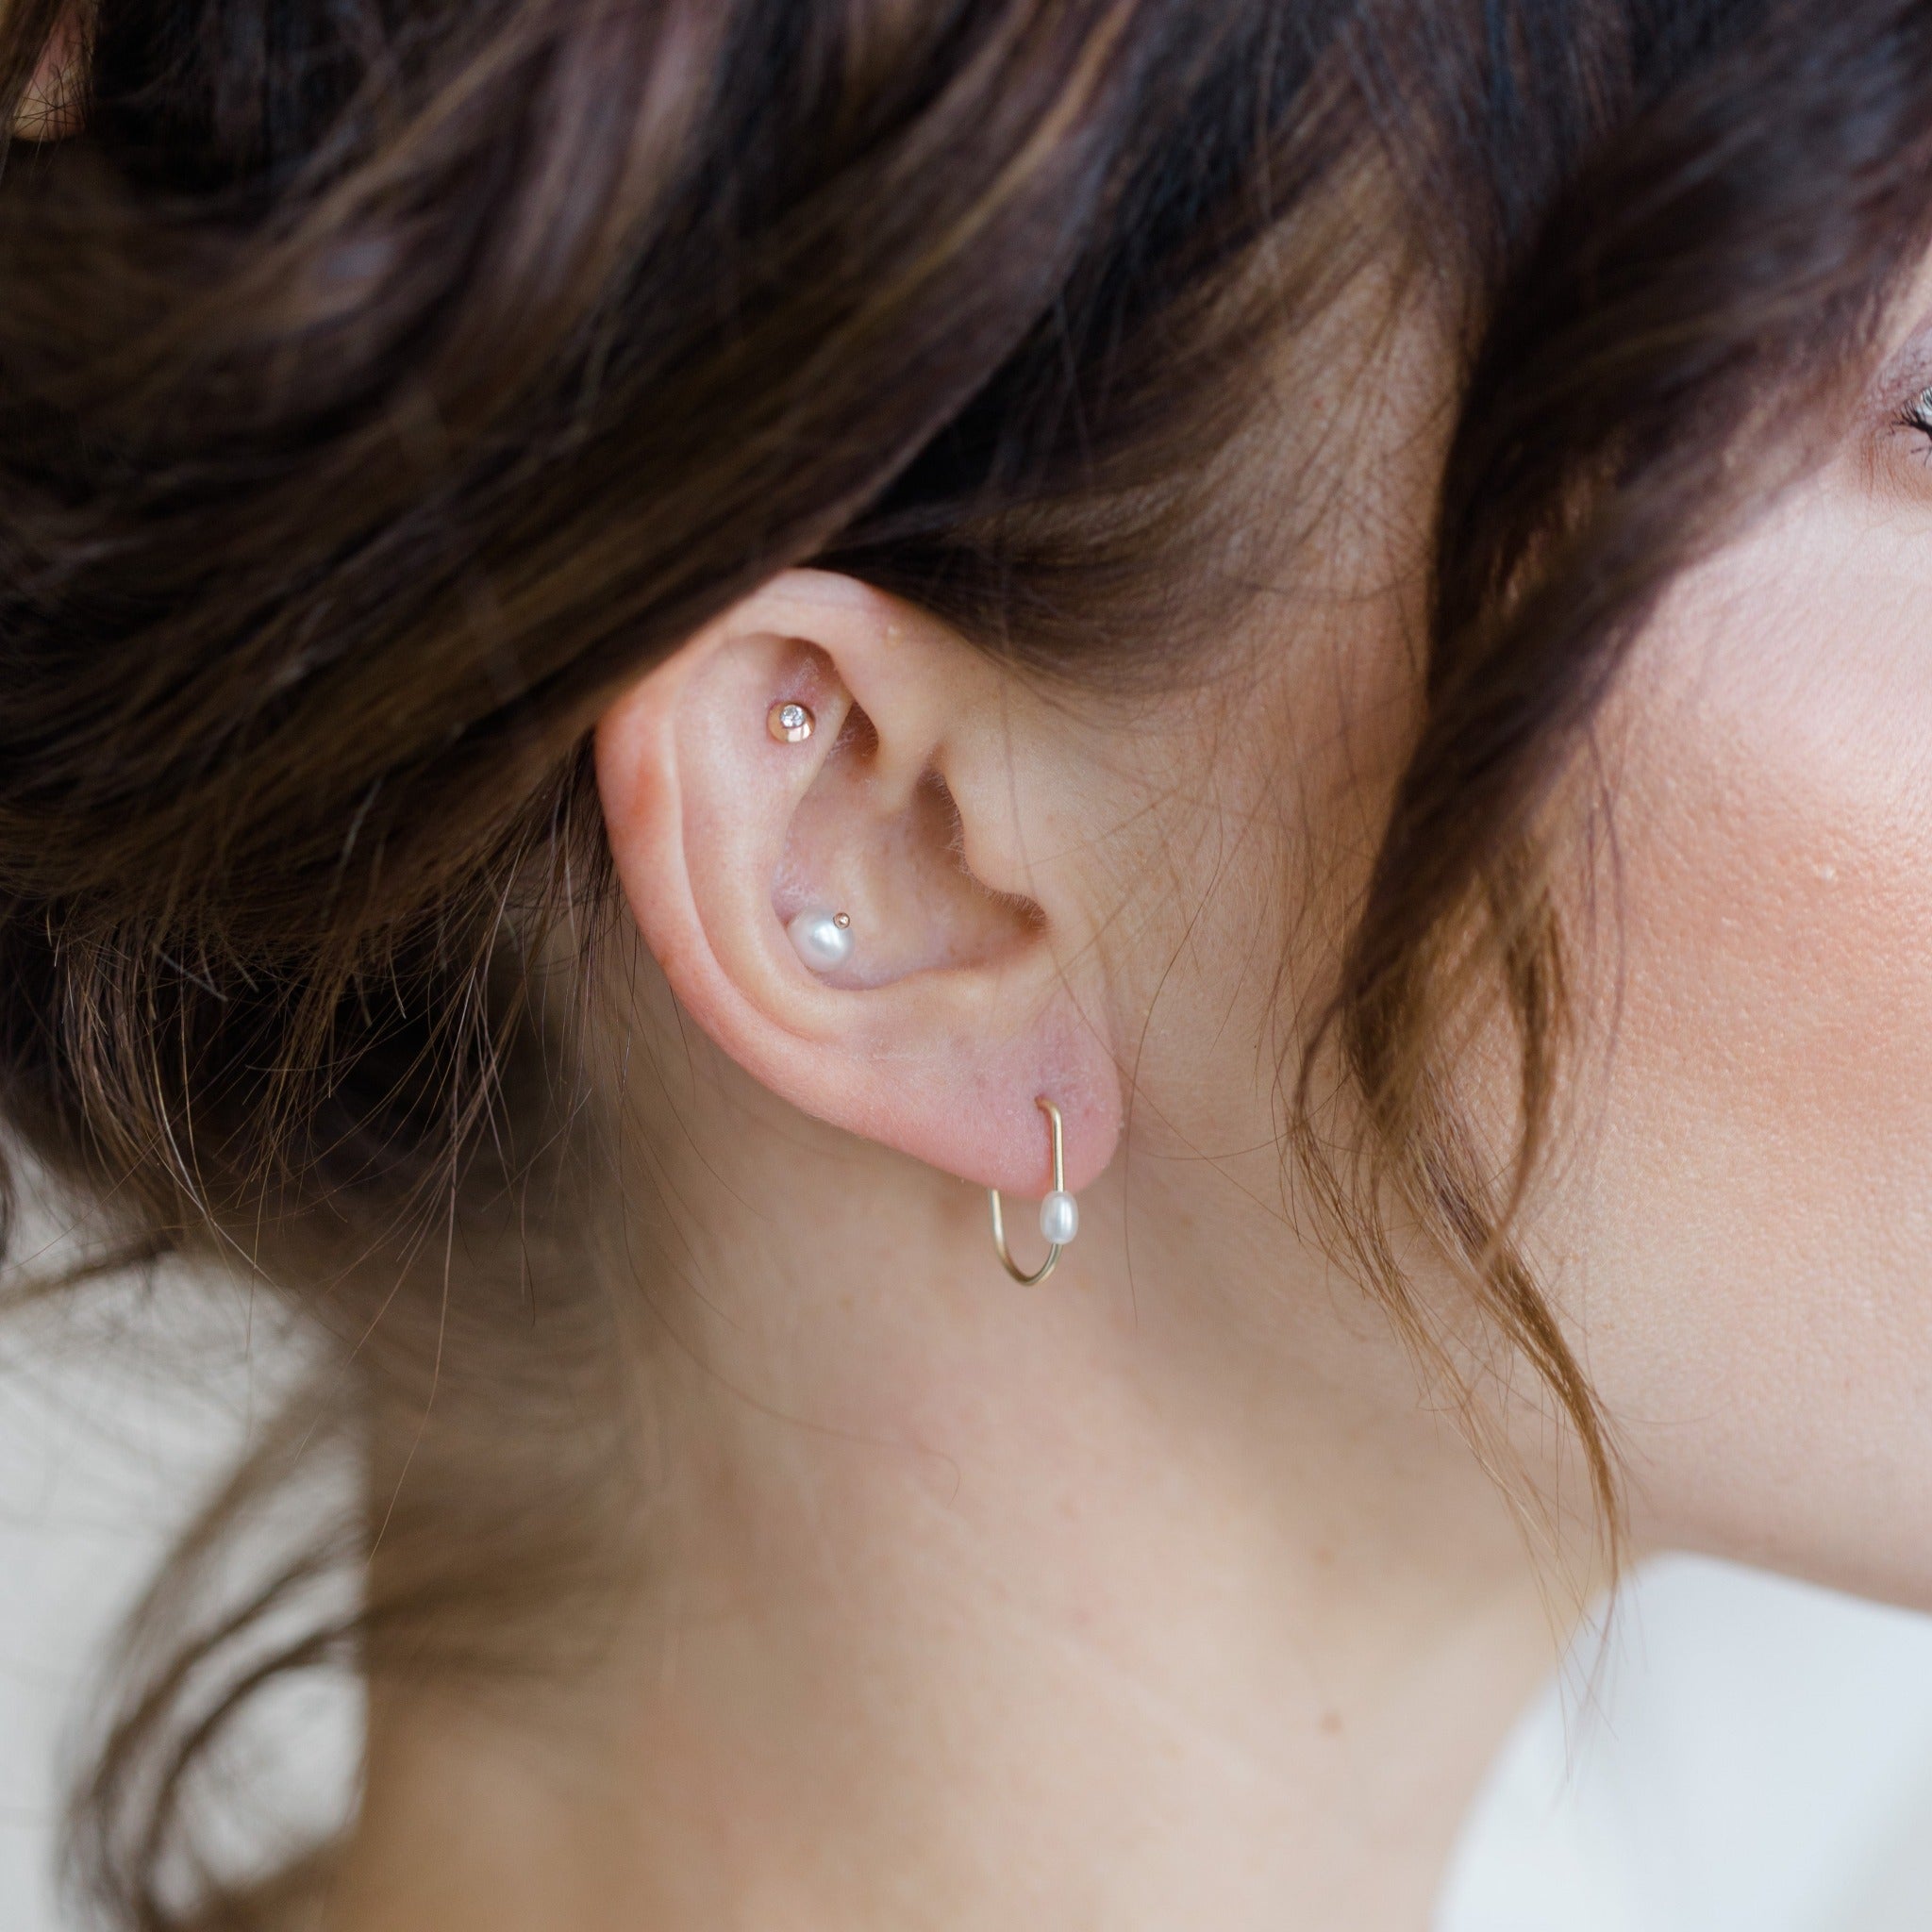 Handcrafted gold and diamond stud earrings shown with other stylish earrings. It's an ear party. Curate your own style with these simple small earrings that work together.